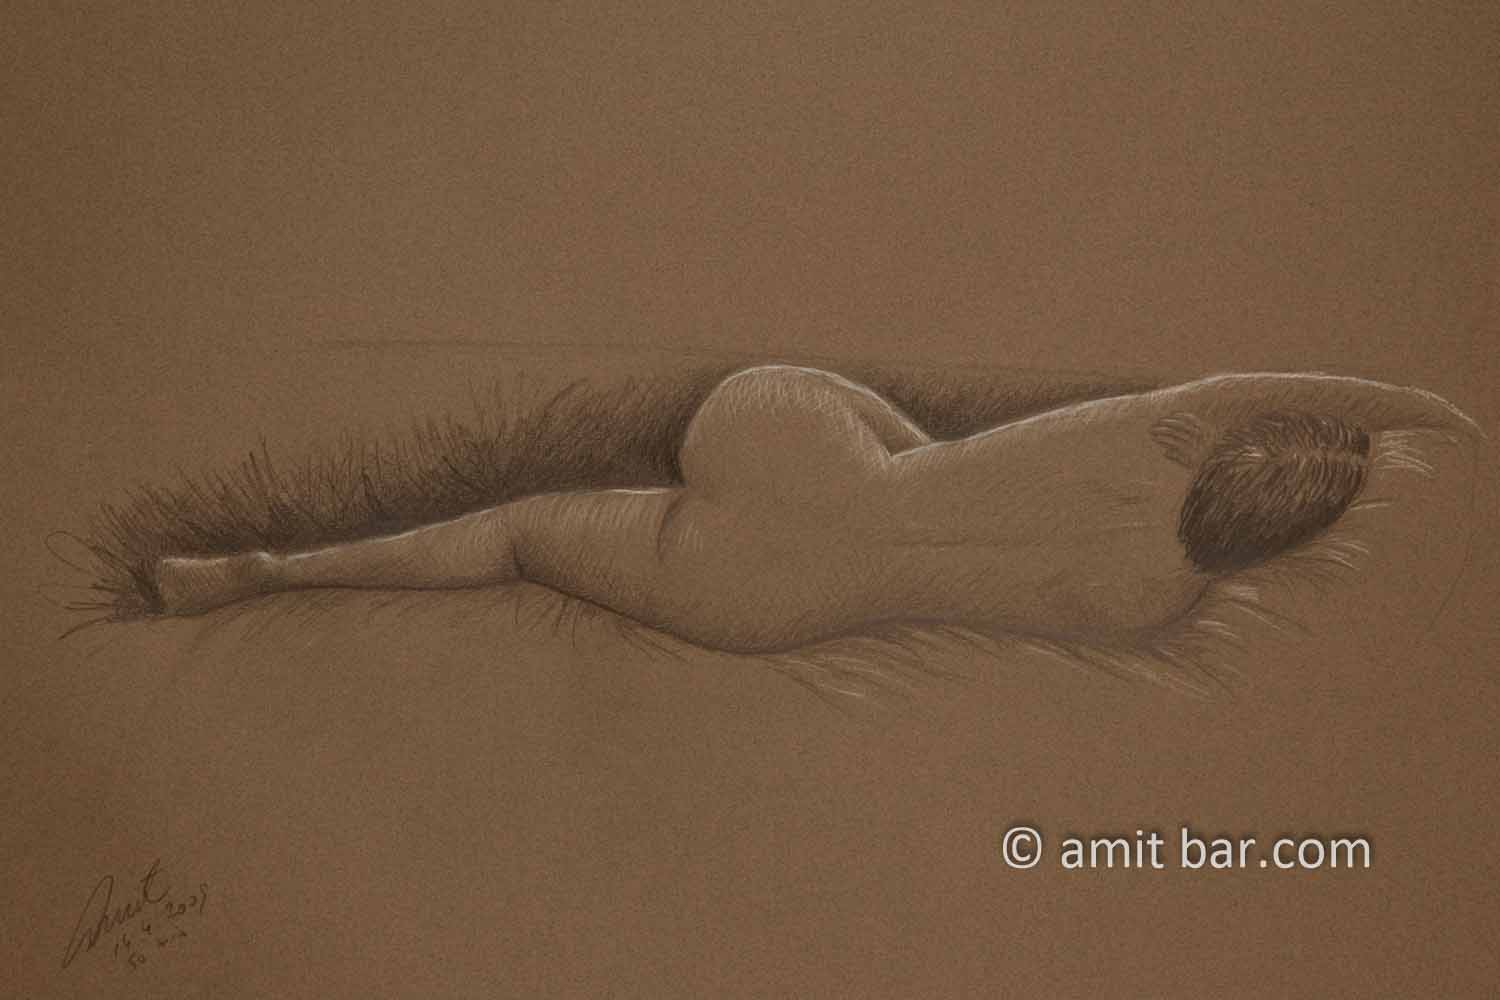 Lying nude model from her back on brwon paper. Pencil drawing